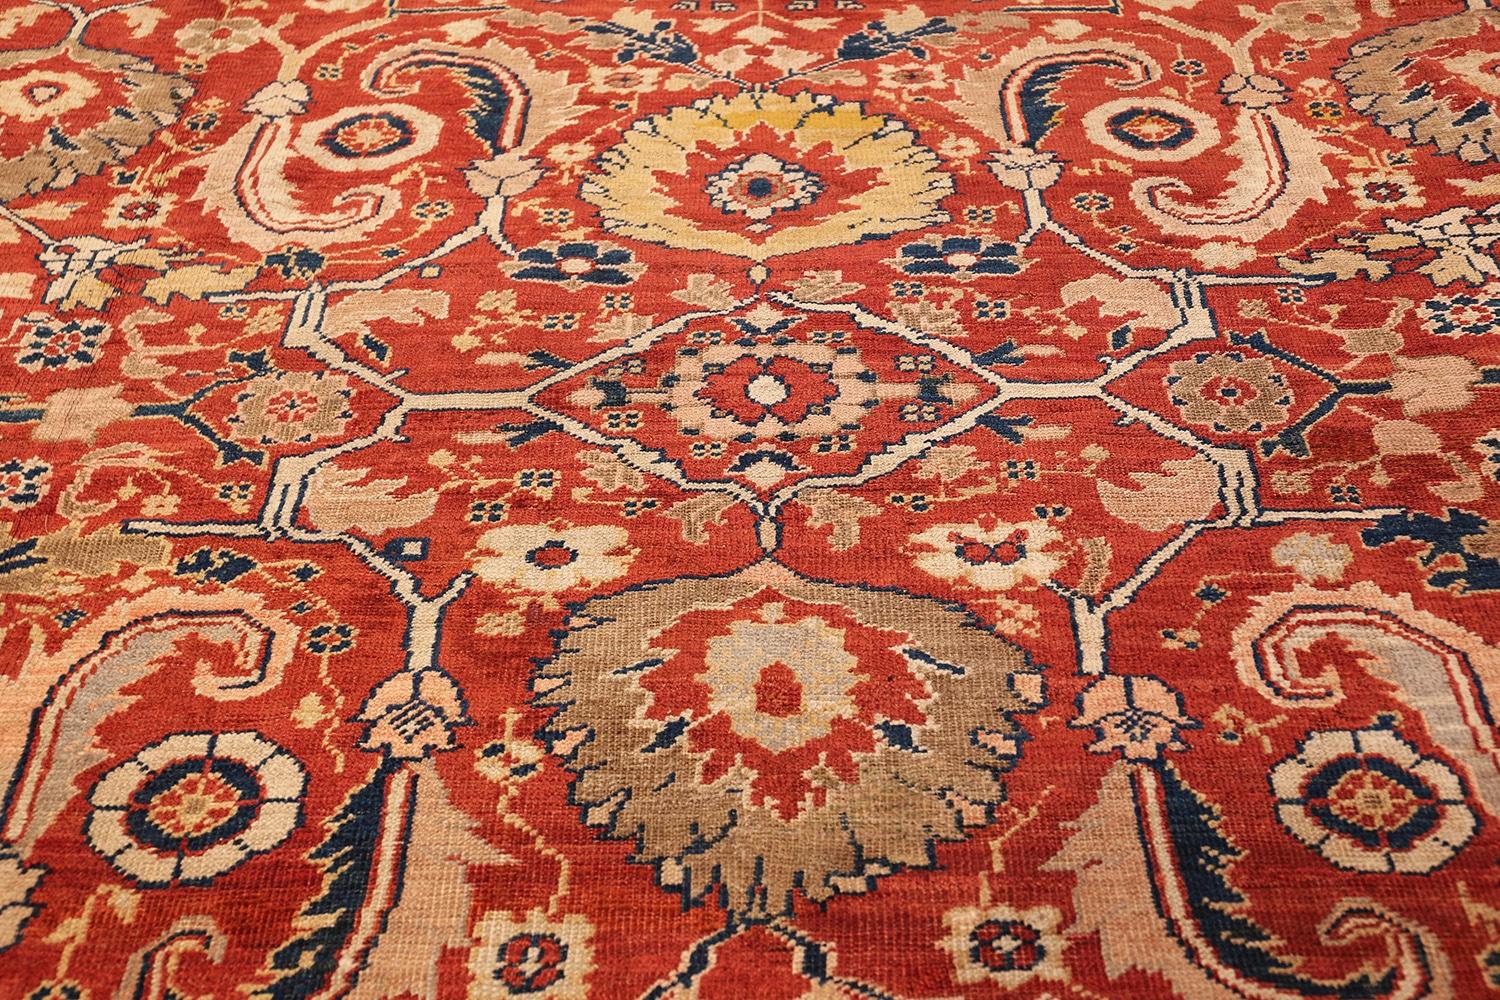 Antique Persian Sultanabad Rug. Size: 13' 7